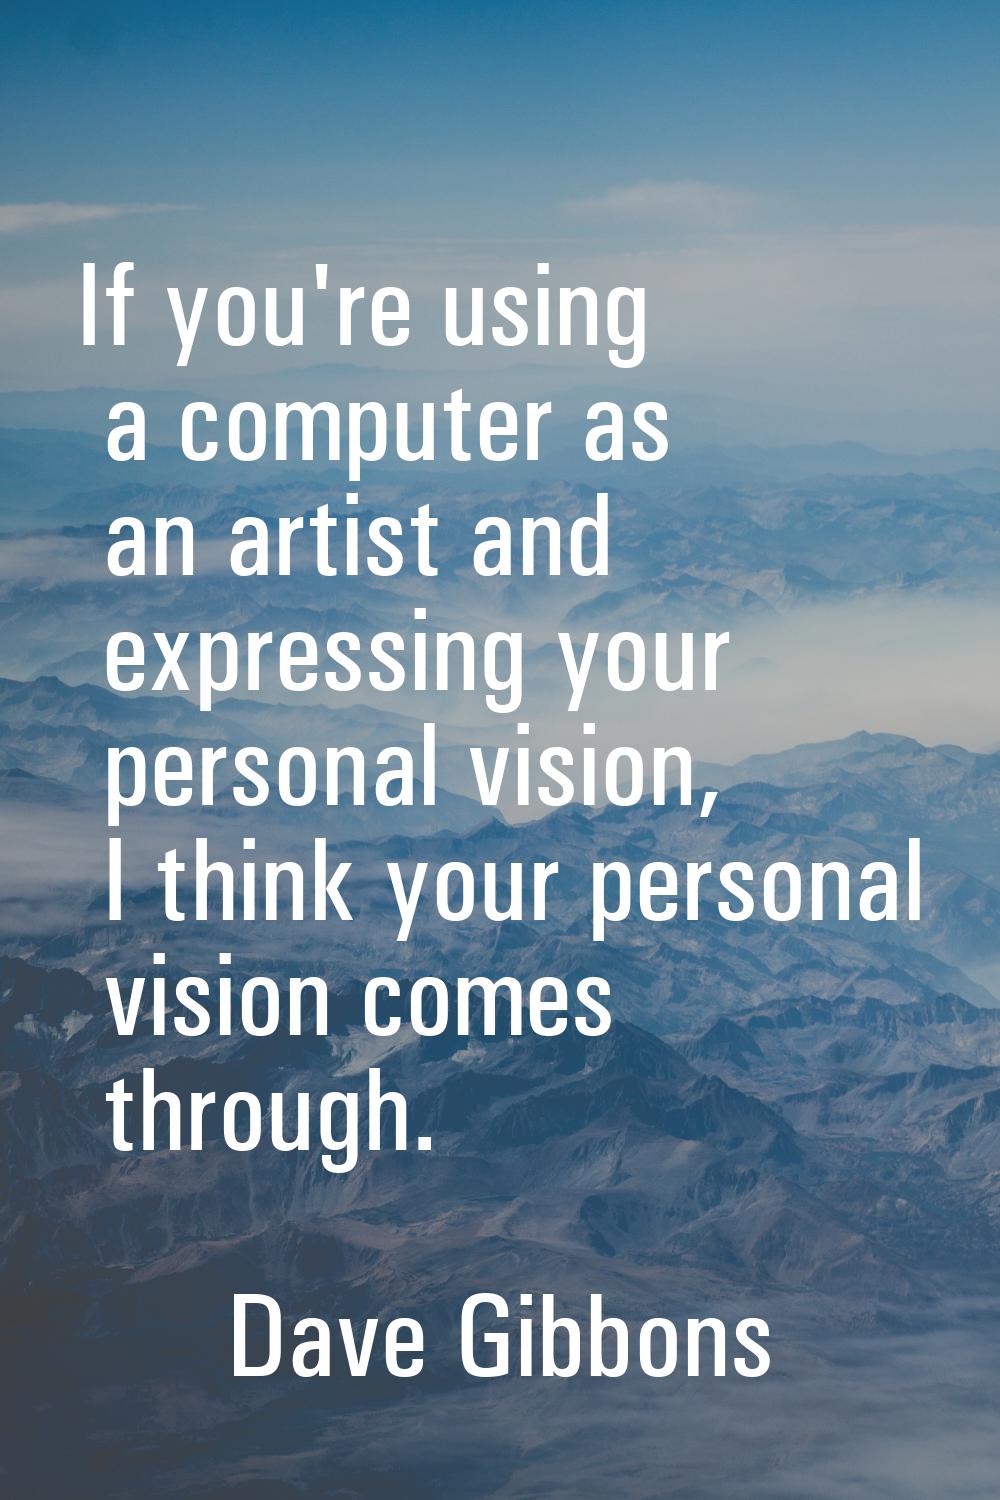 If you're using a computer as an artist and expressing your personal vision, I think your personal 